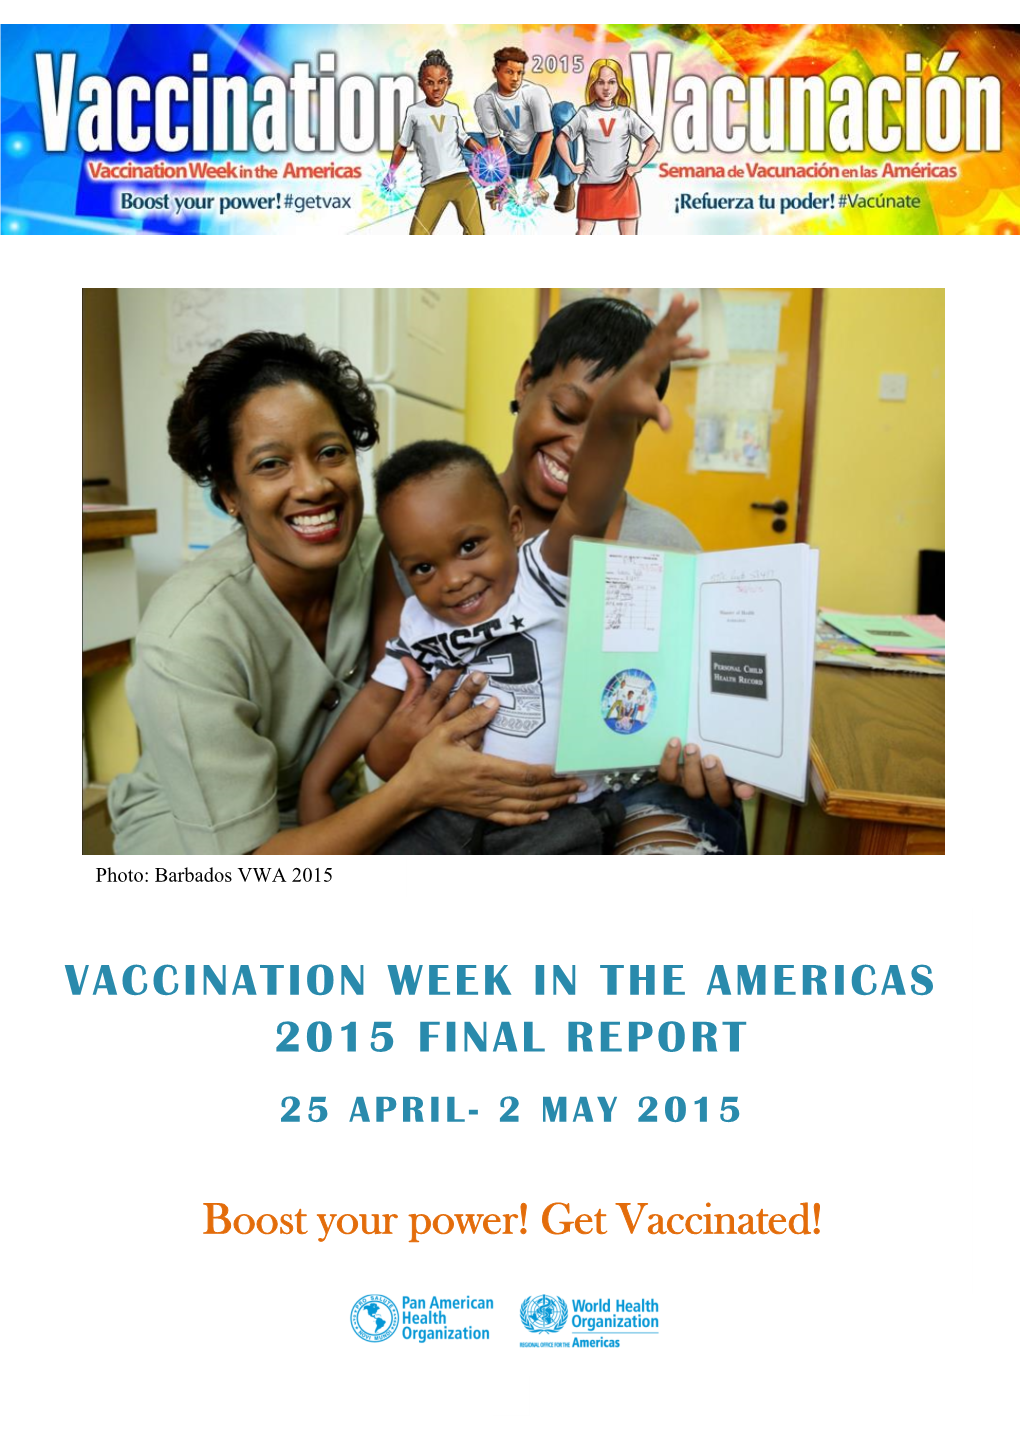 VACCINATION WEEK in the AMERICAS 2015 FINAL REPORT Boost Your Power! Get Vaccinated!